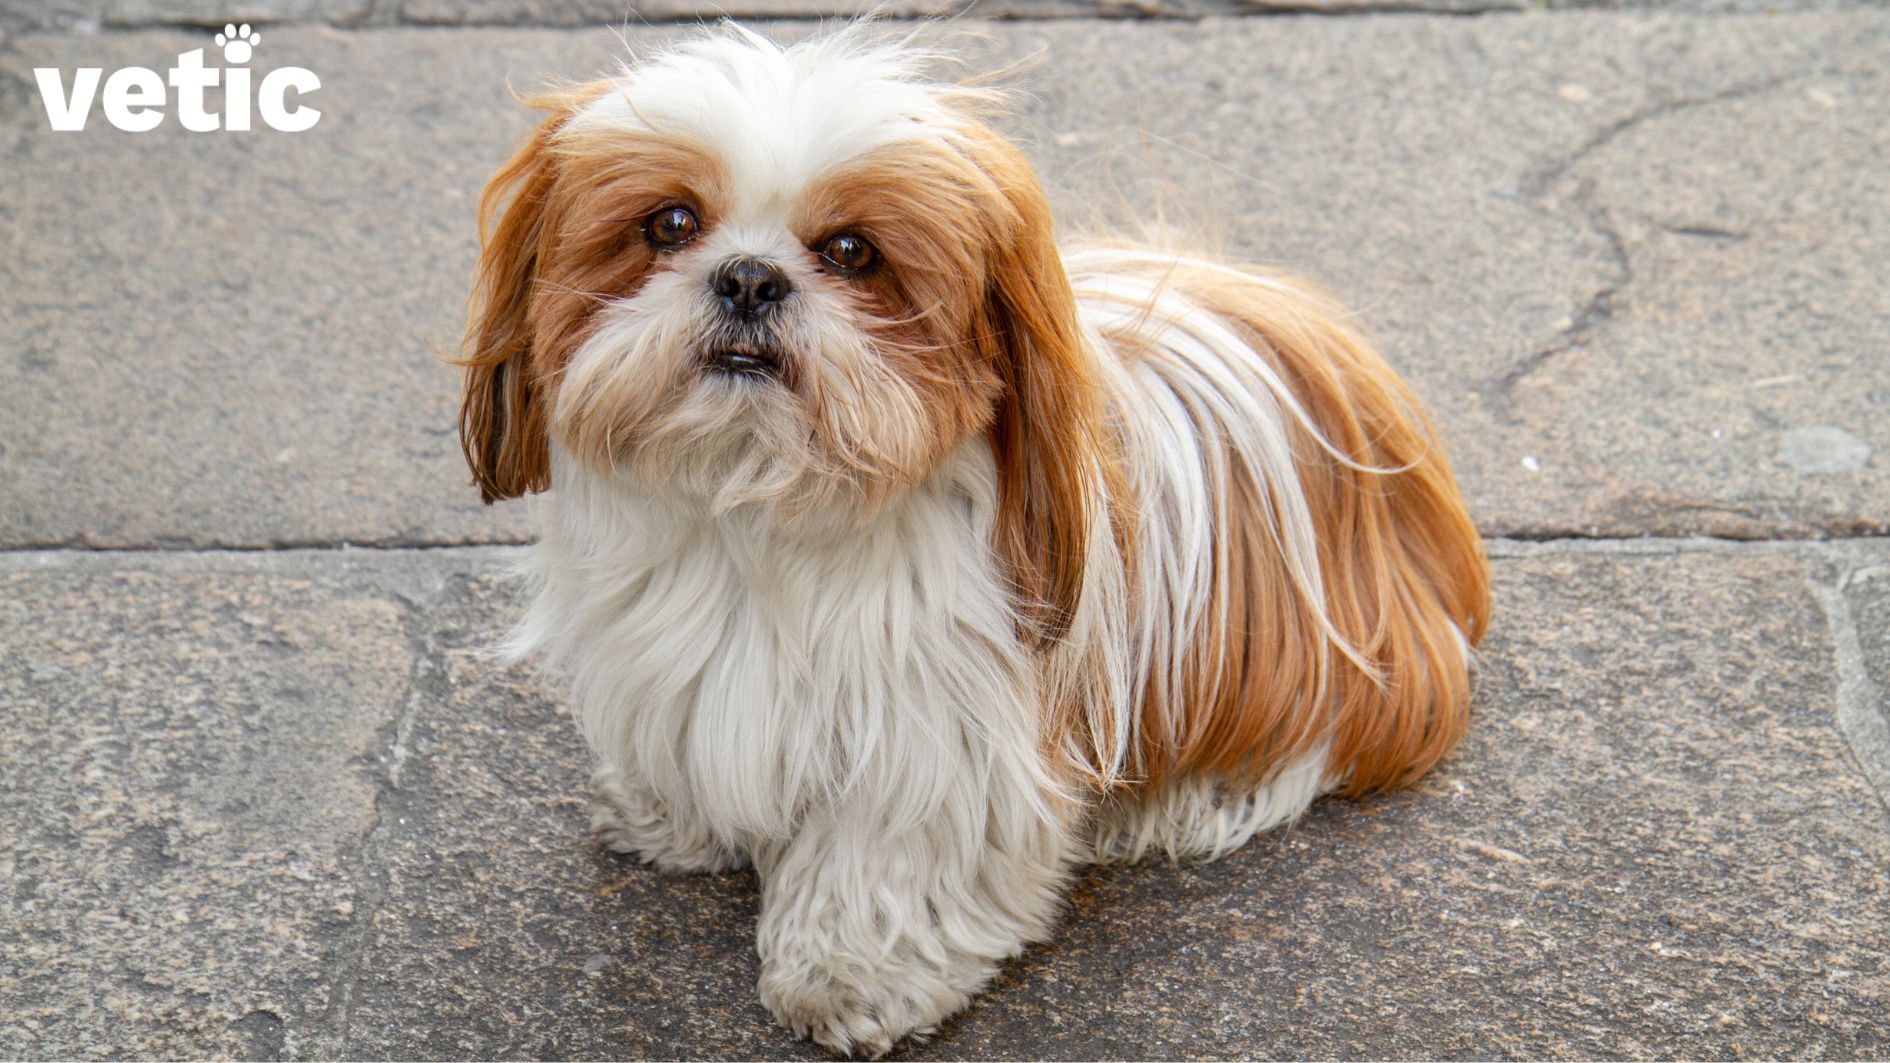 Shih Tzu breed pup sitting on a stone pavement looking up at the camera. The pup has light brown fur around their eyes, on their ears and back.